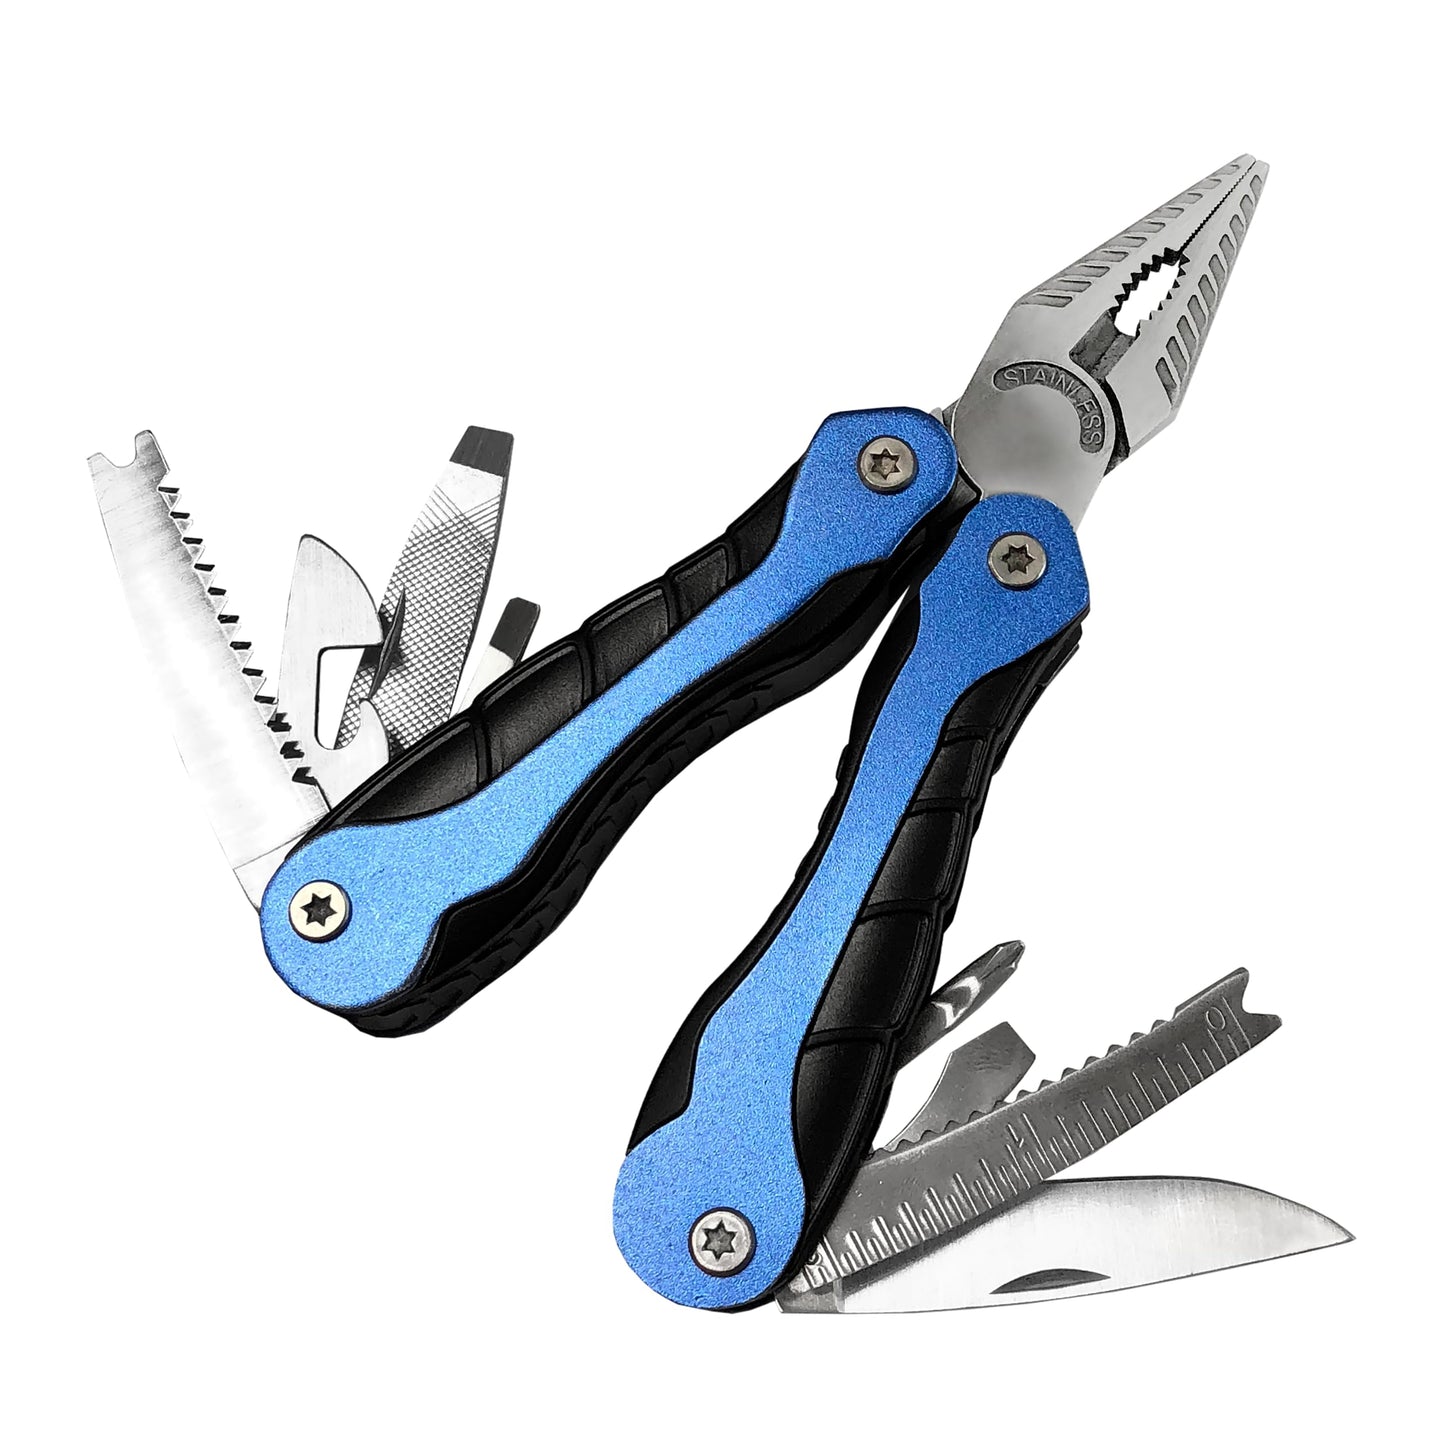 ParaForce 15 Function Multitool - 15-in-1 Outdoor Multitool with Pliers - Pocket Pliers for Fishing, Hunting & Camping - Foldable Pliers with Knife, Fish Scaler, Hook Remover & Wire Cutters